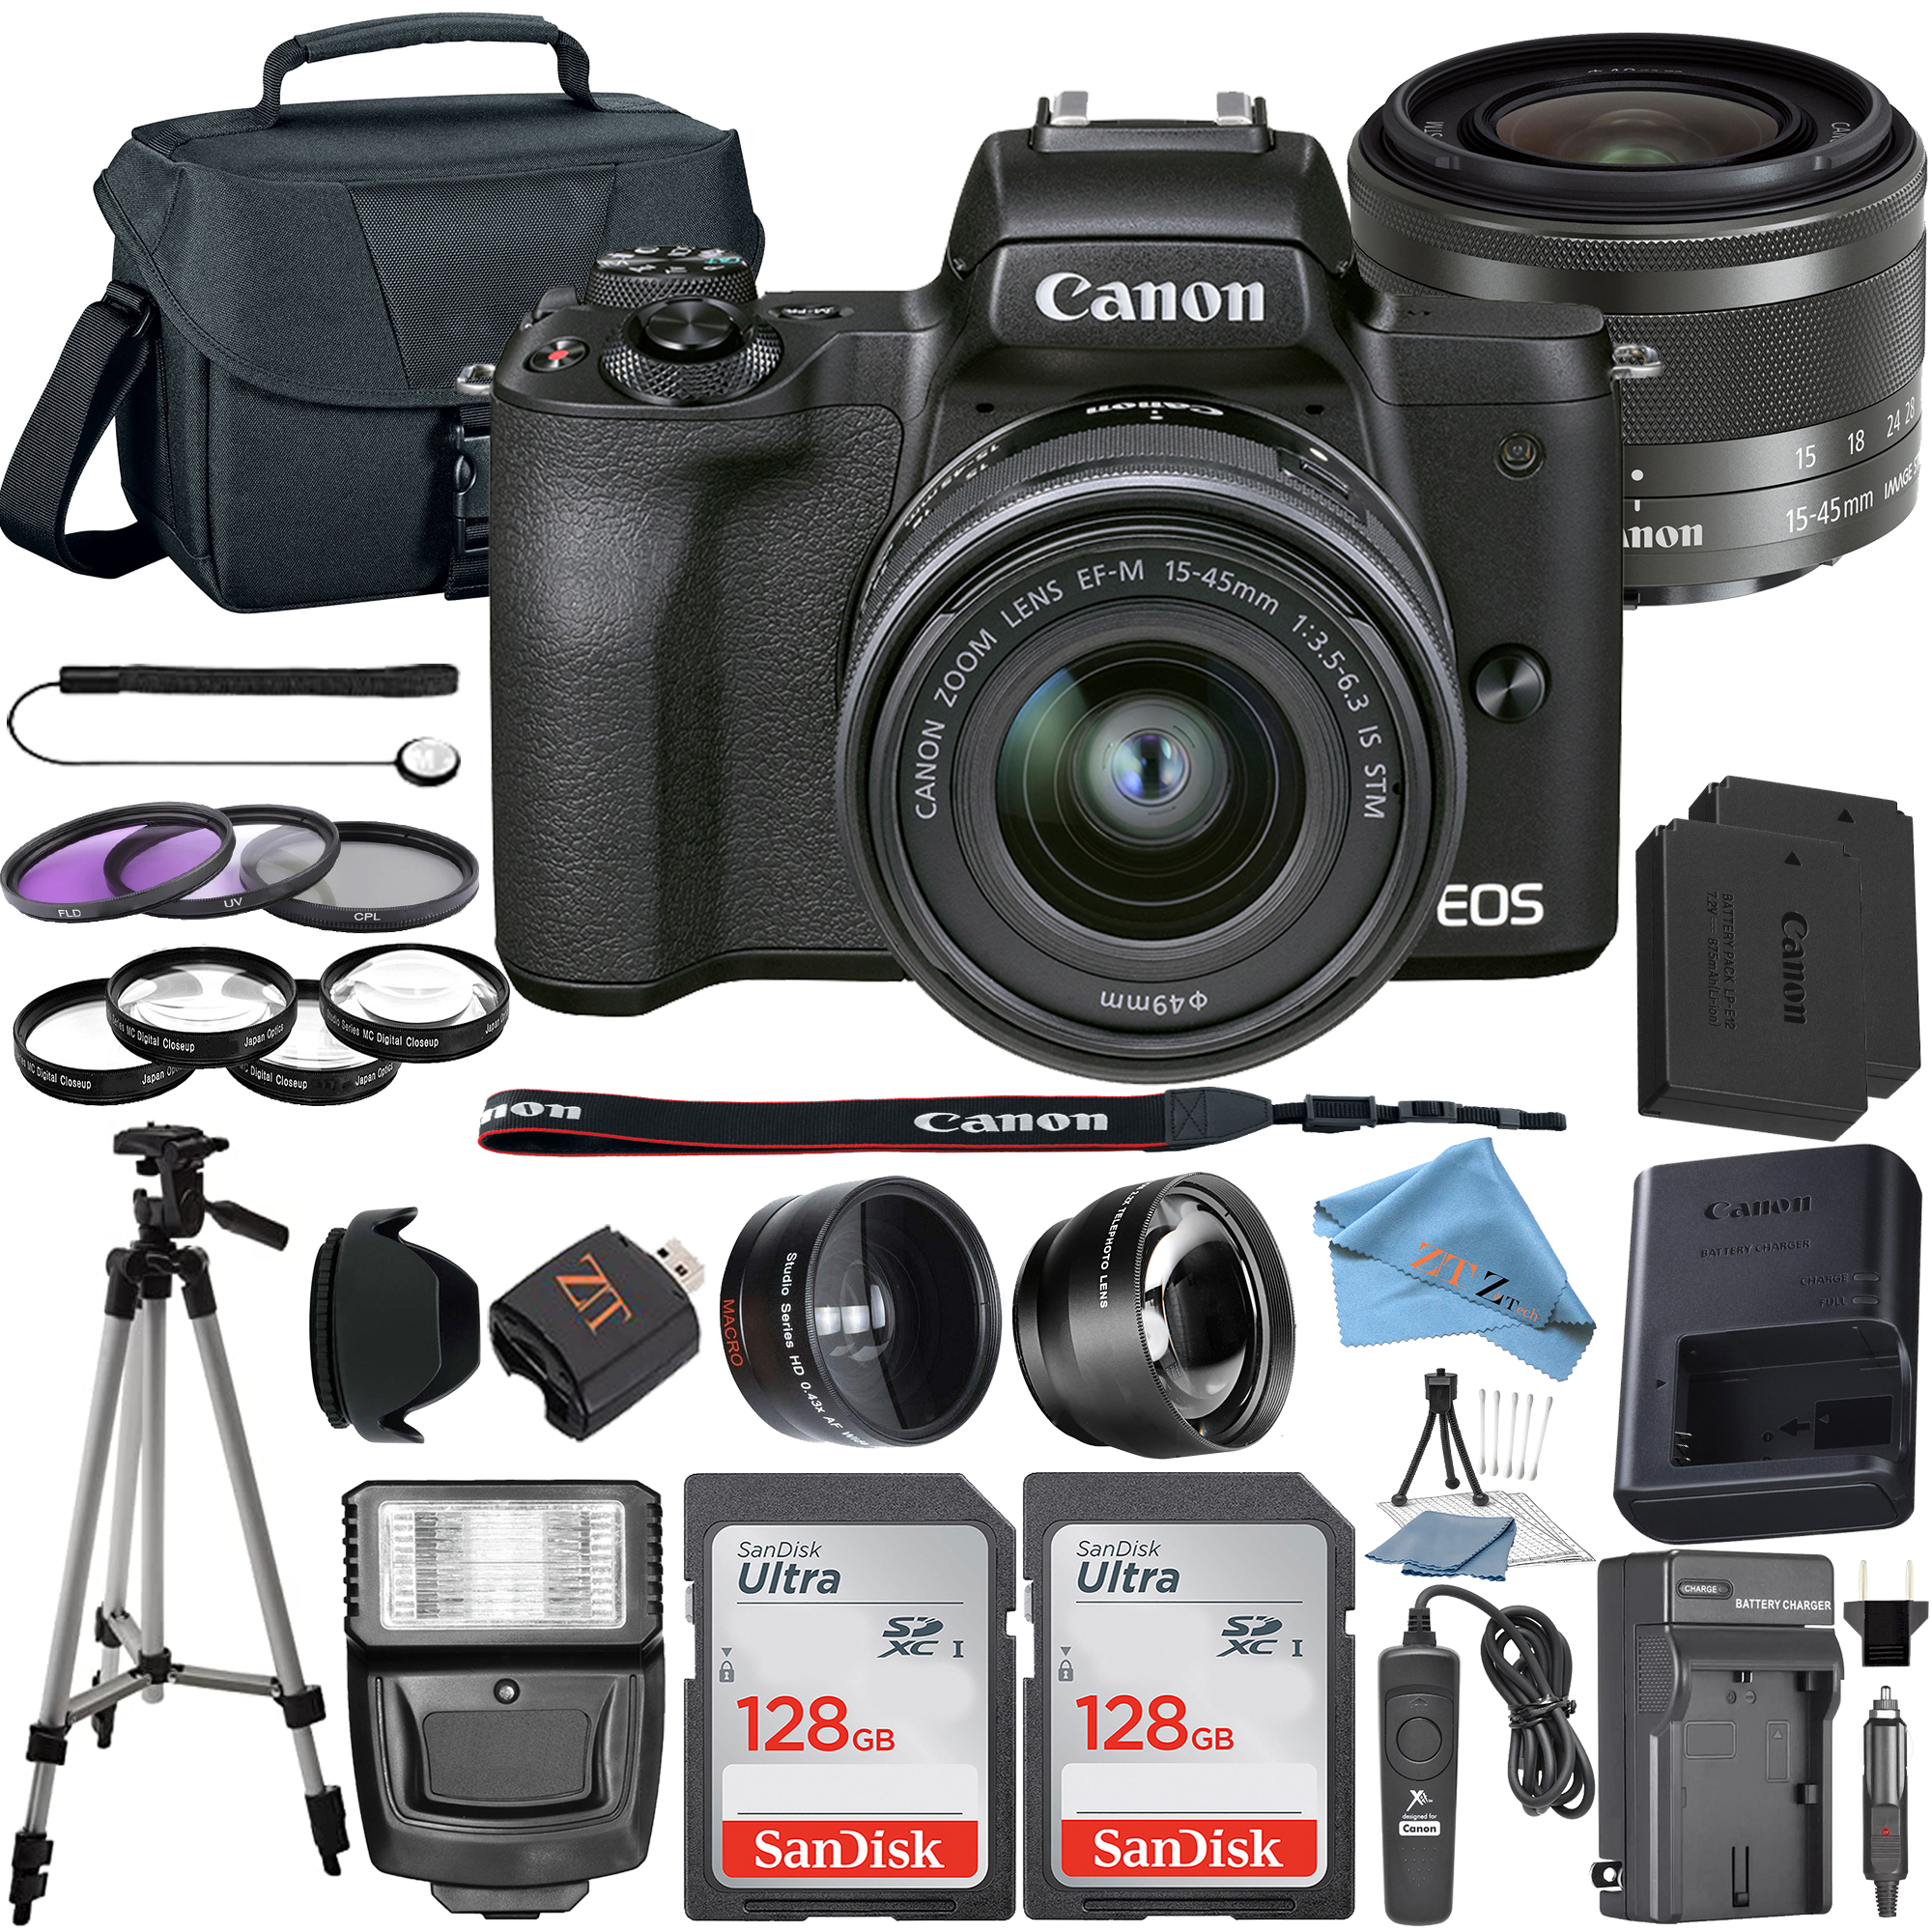 Canon EOS M50 Mark II Mirrorless Camera Bundle with 15-45mm Lens, SanDisk 128GB SanDisk Memory Card, Case, Wideangle, ZeeTech Accessory